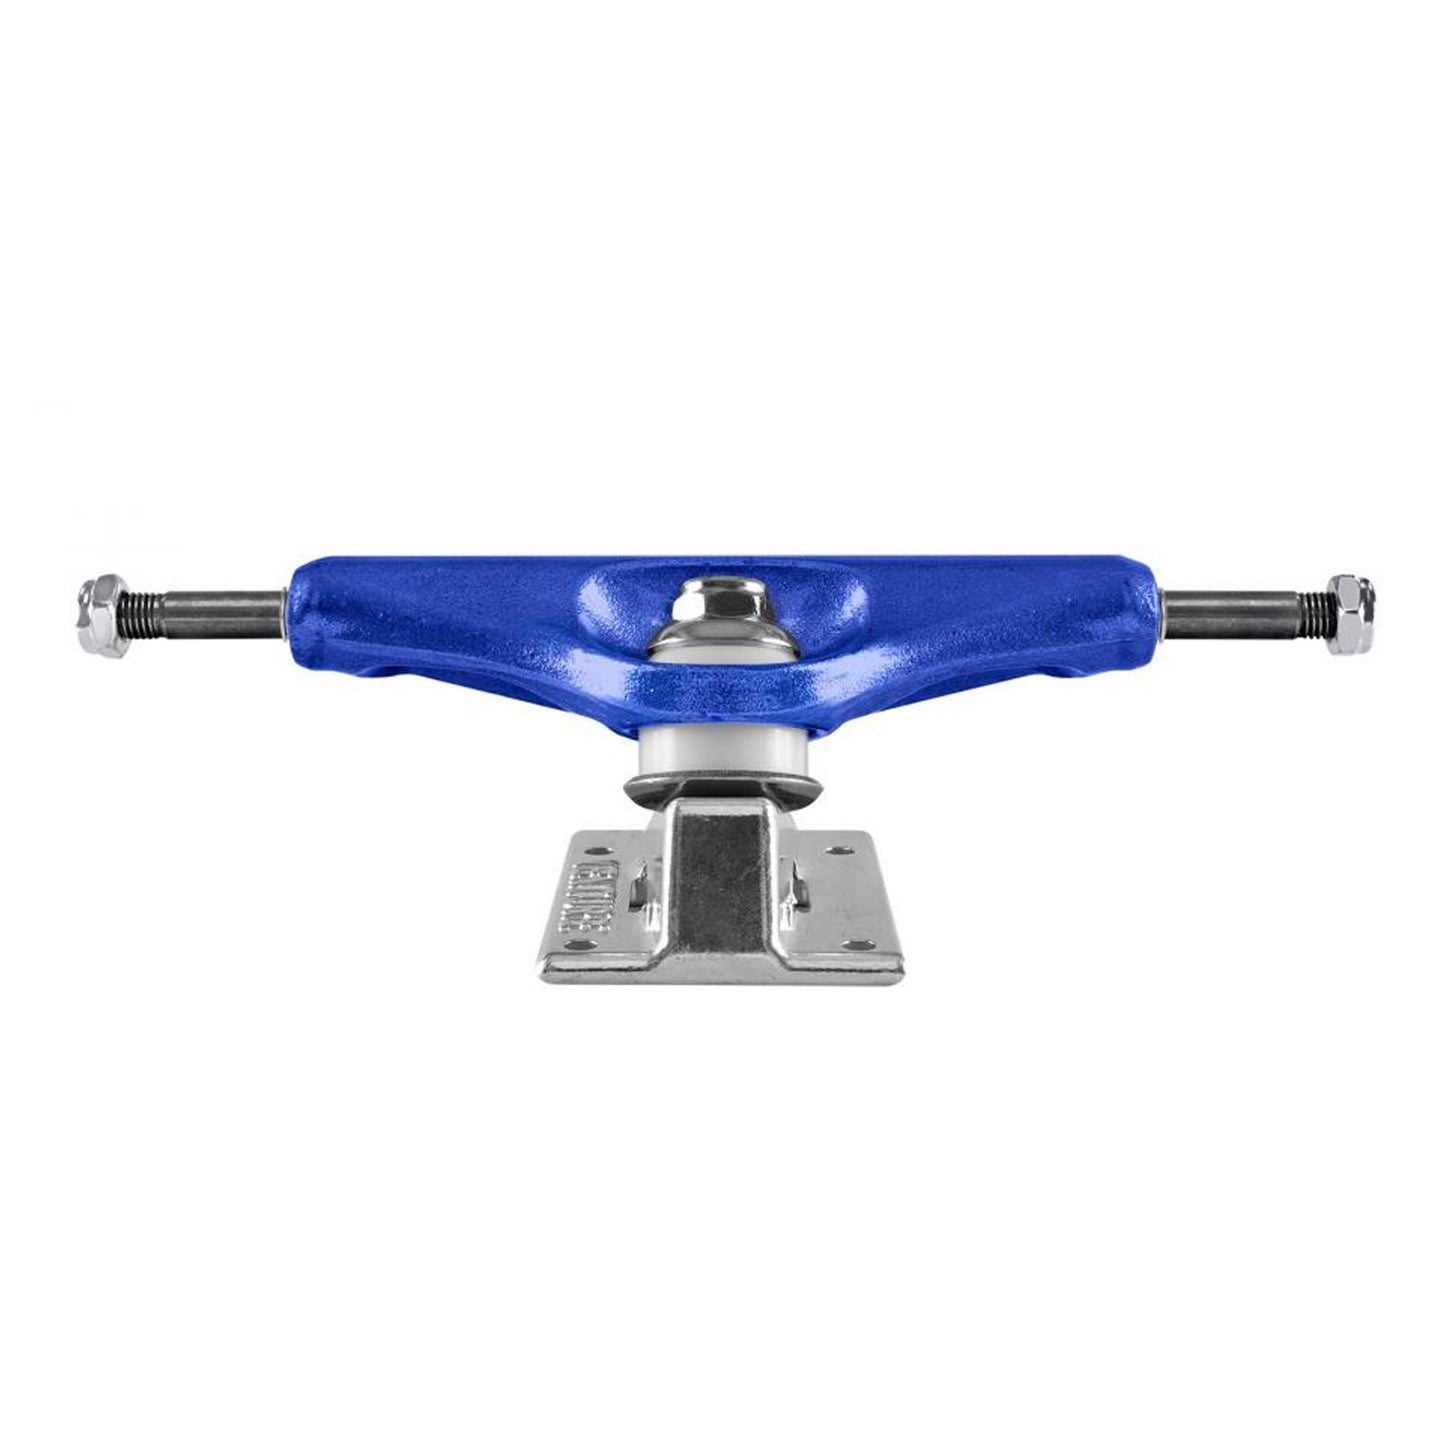 Venture - V Hollow High Truck 5.0 (7.75") - Anodised Blue (Sold as a pair) - Prime Delux Store